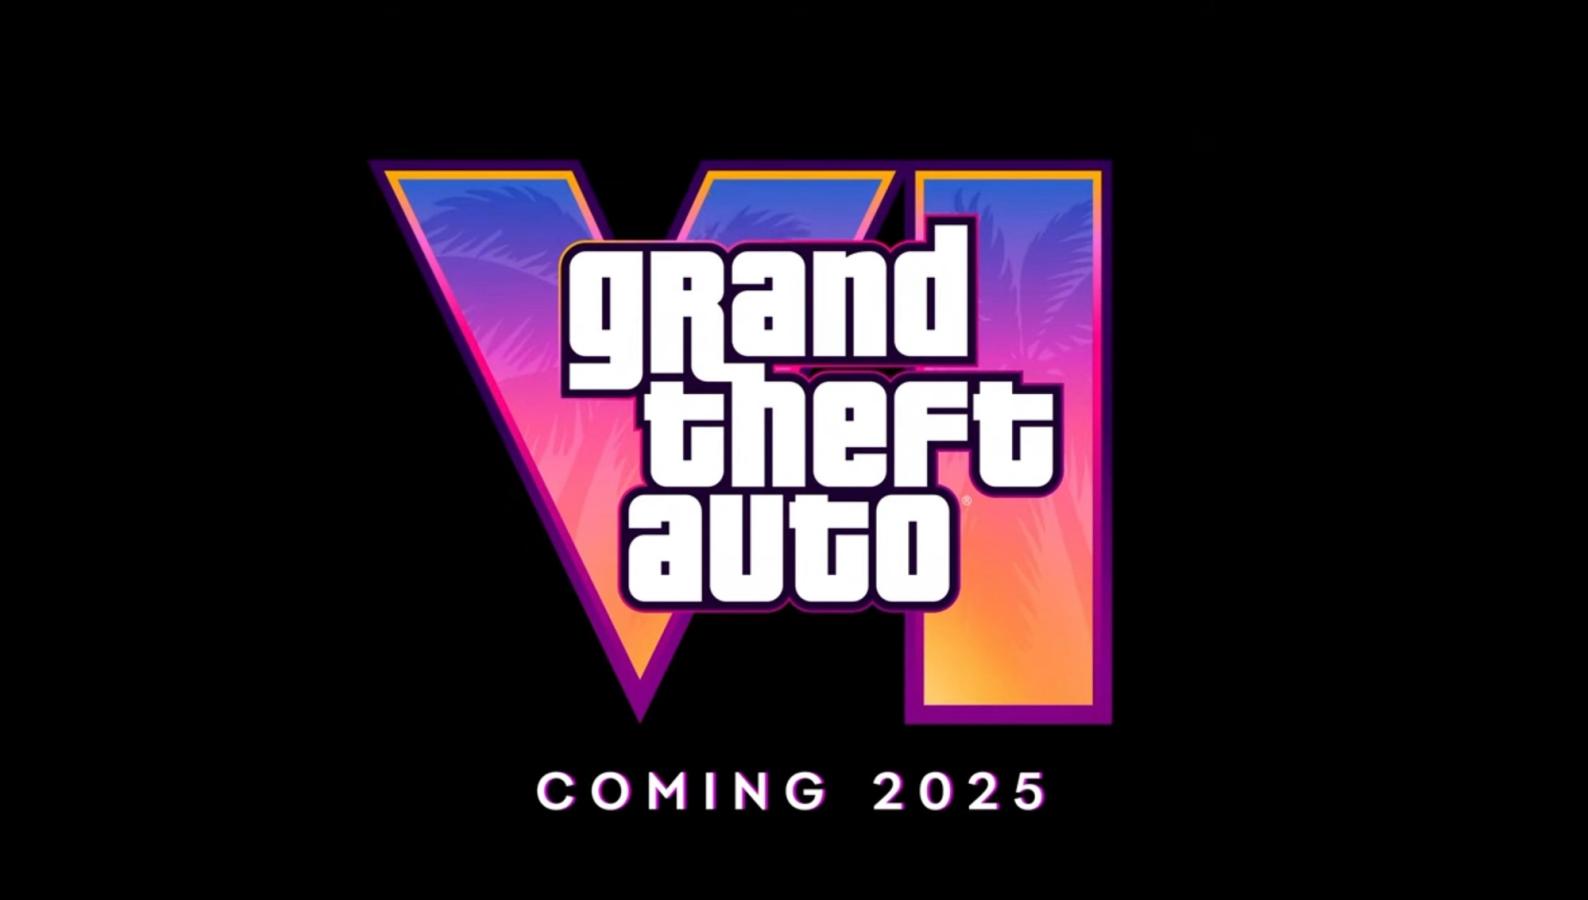 Screengrab from the GTA 6 trailer showing the GTA VI logo and the words "coming 2025"